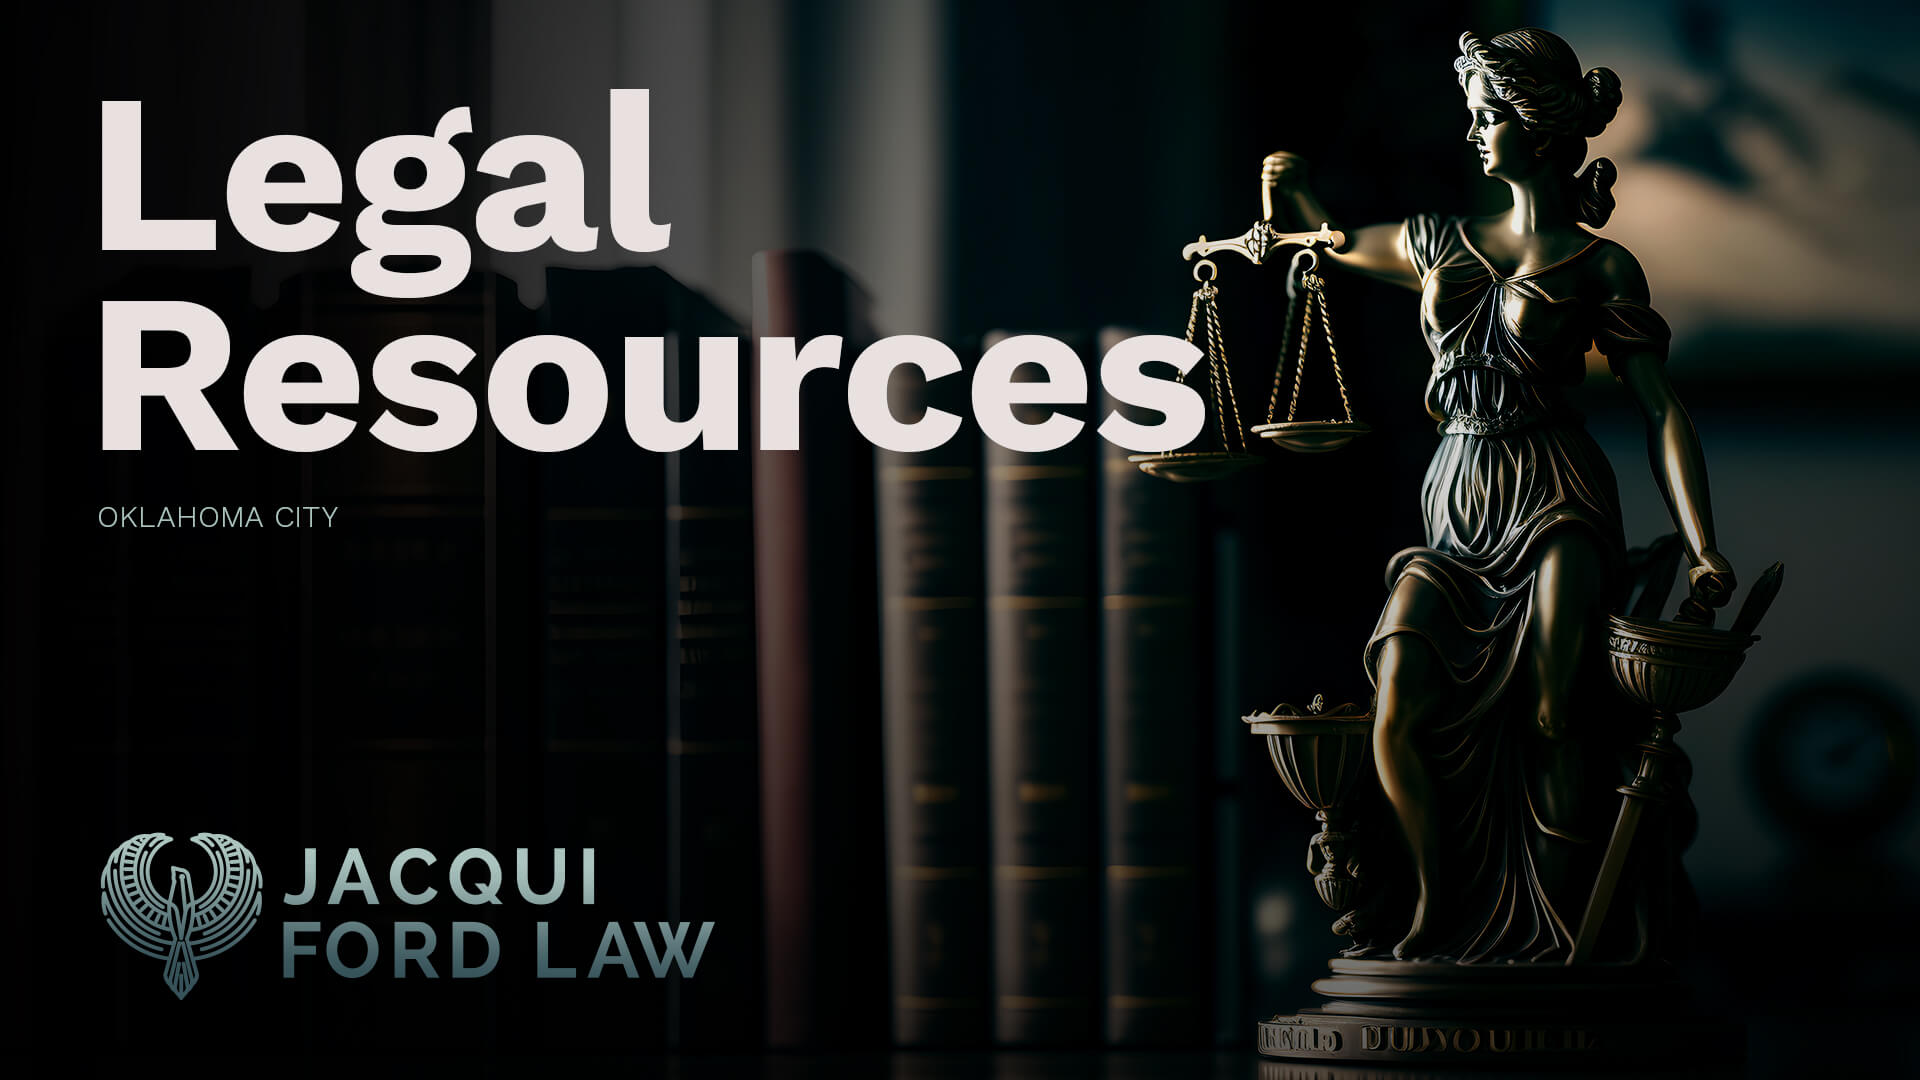 Jacqui-Ford-Law-Criminal-Defense-Lawyer-Oklahoma-City-Feat-img-Legal-Resources